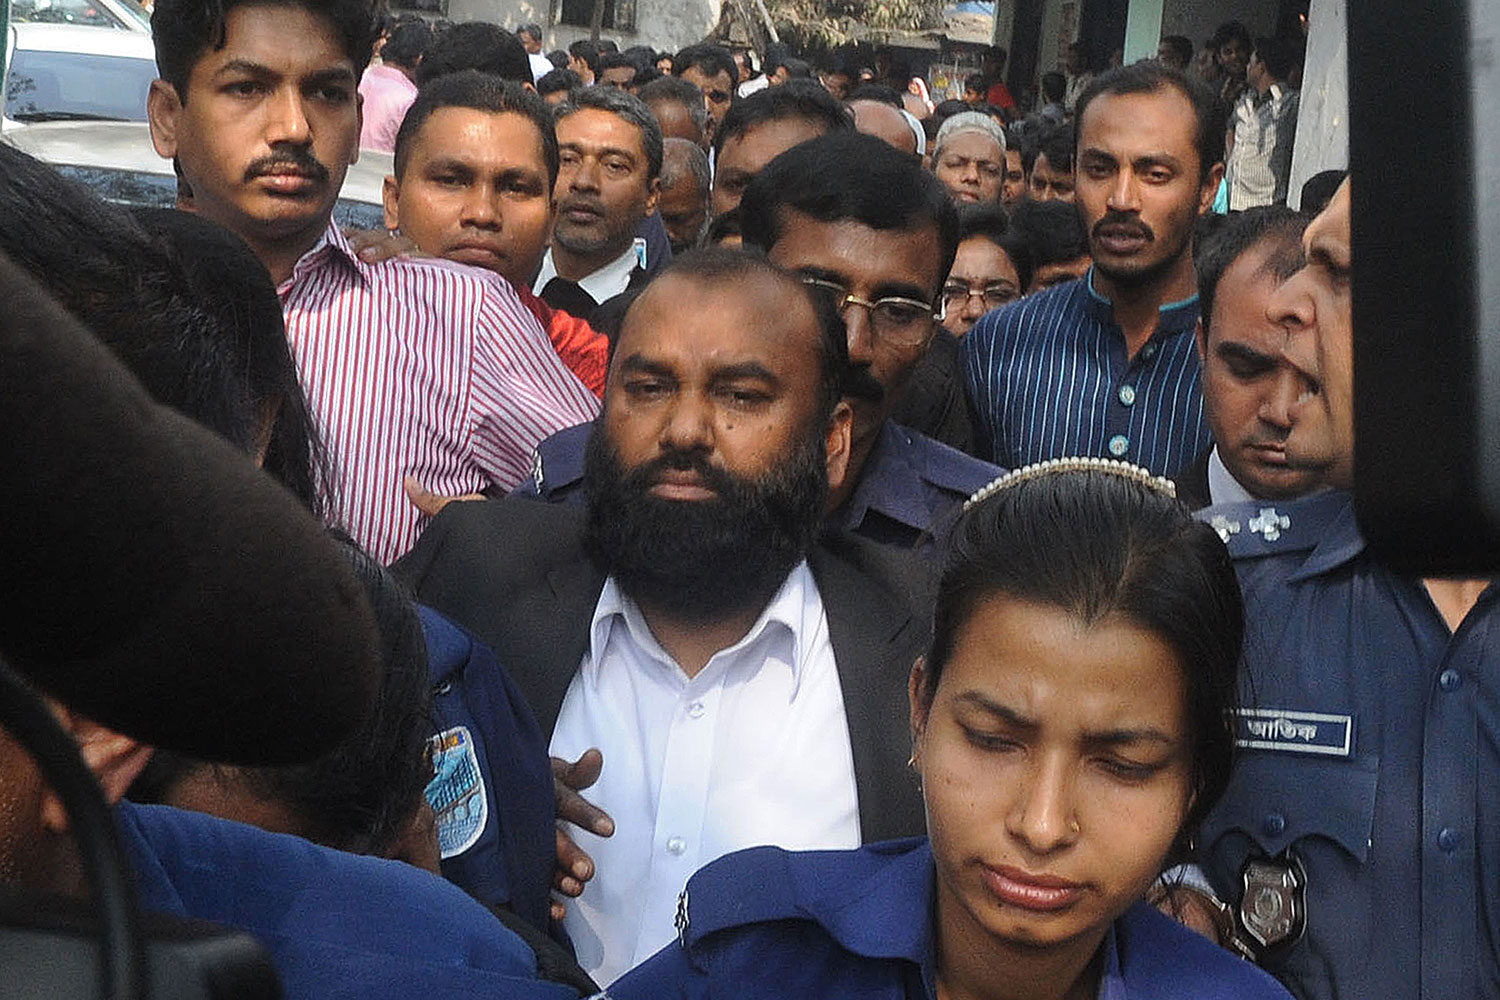 The owner of Tazreen Fashions, Delwar Hossain (C) is escorted to court in Dhaka on Feb. 9, 2014. (STR / AFP / Getty Images)